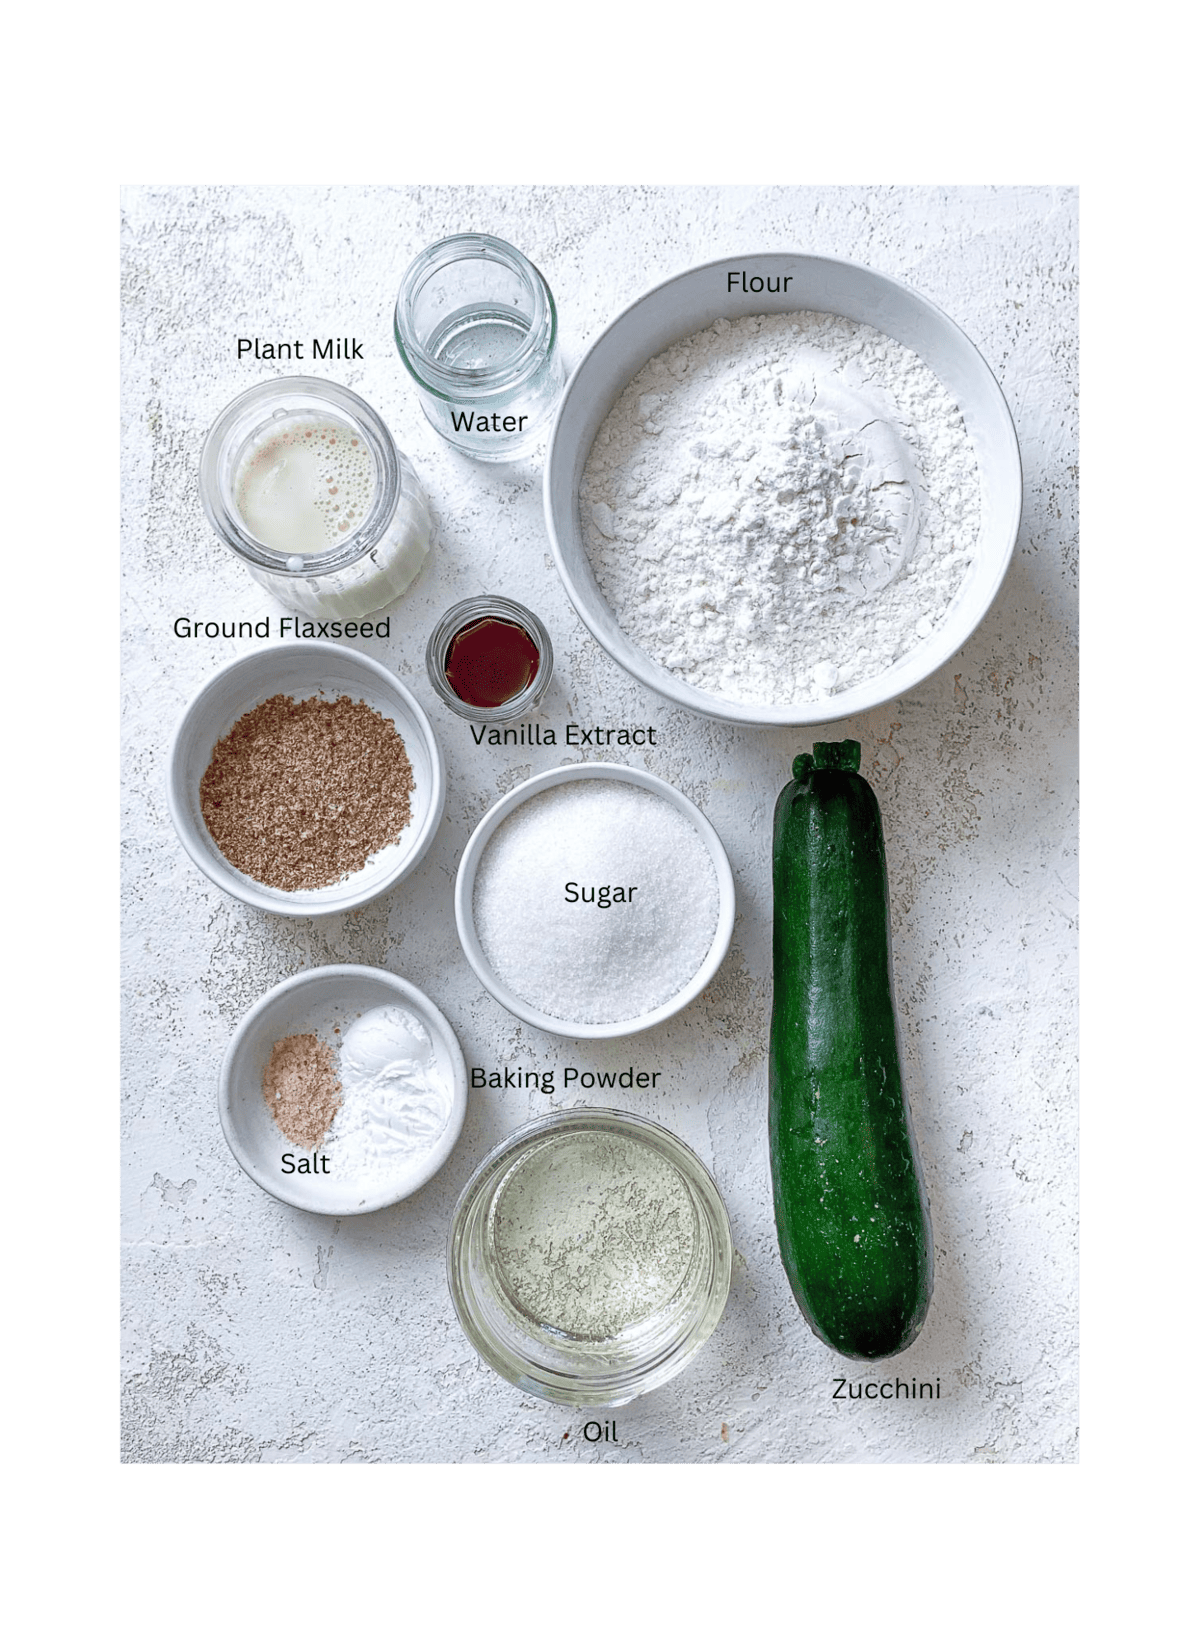 ingredients for Easy Vegan Zucchini Muffins measured out against a white surface